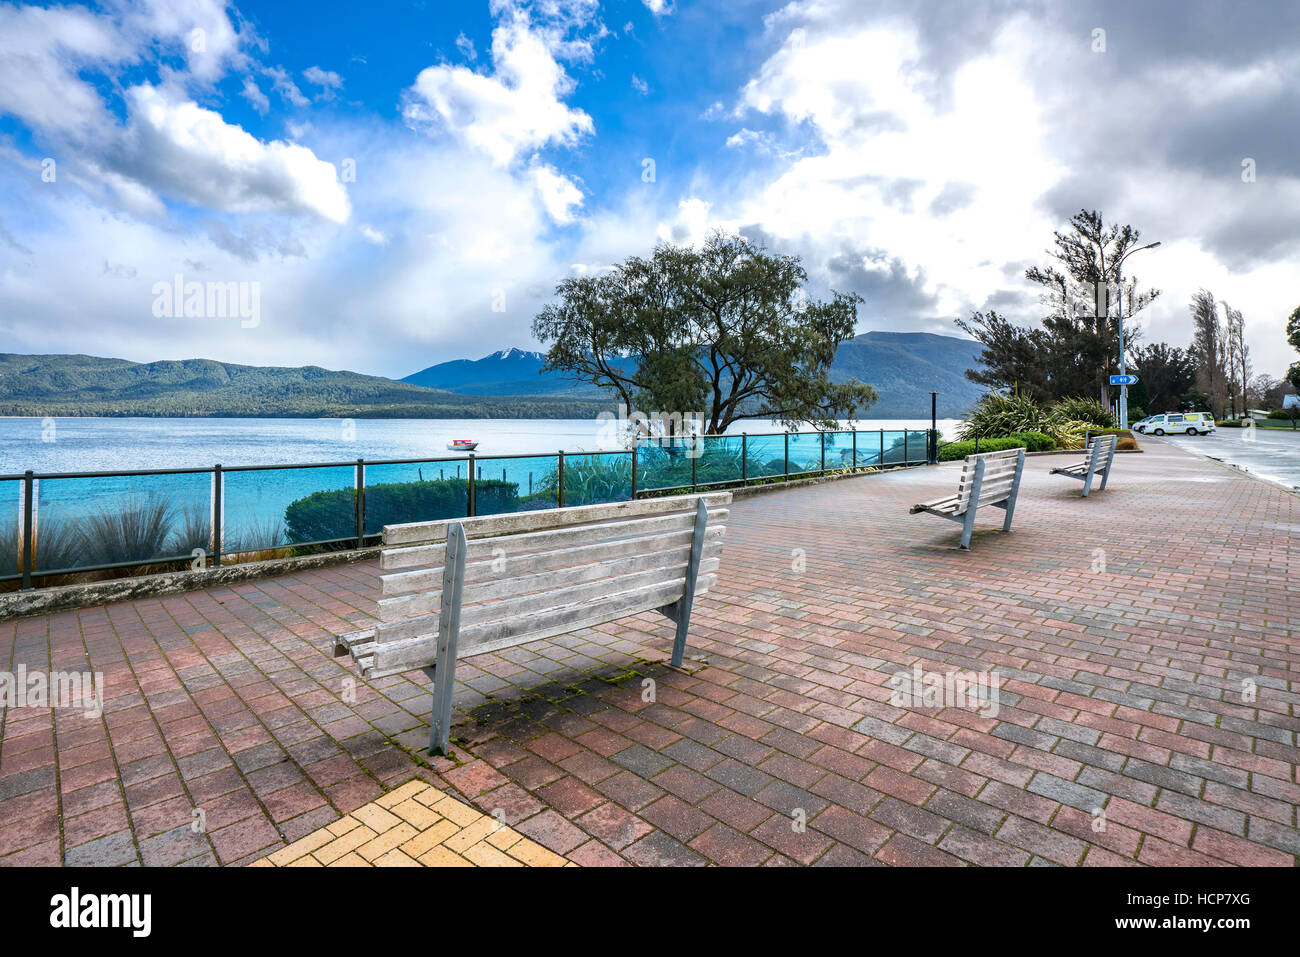 A row of wooden brench in front of Te anau lake, New Zealand Stock Photo